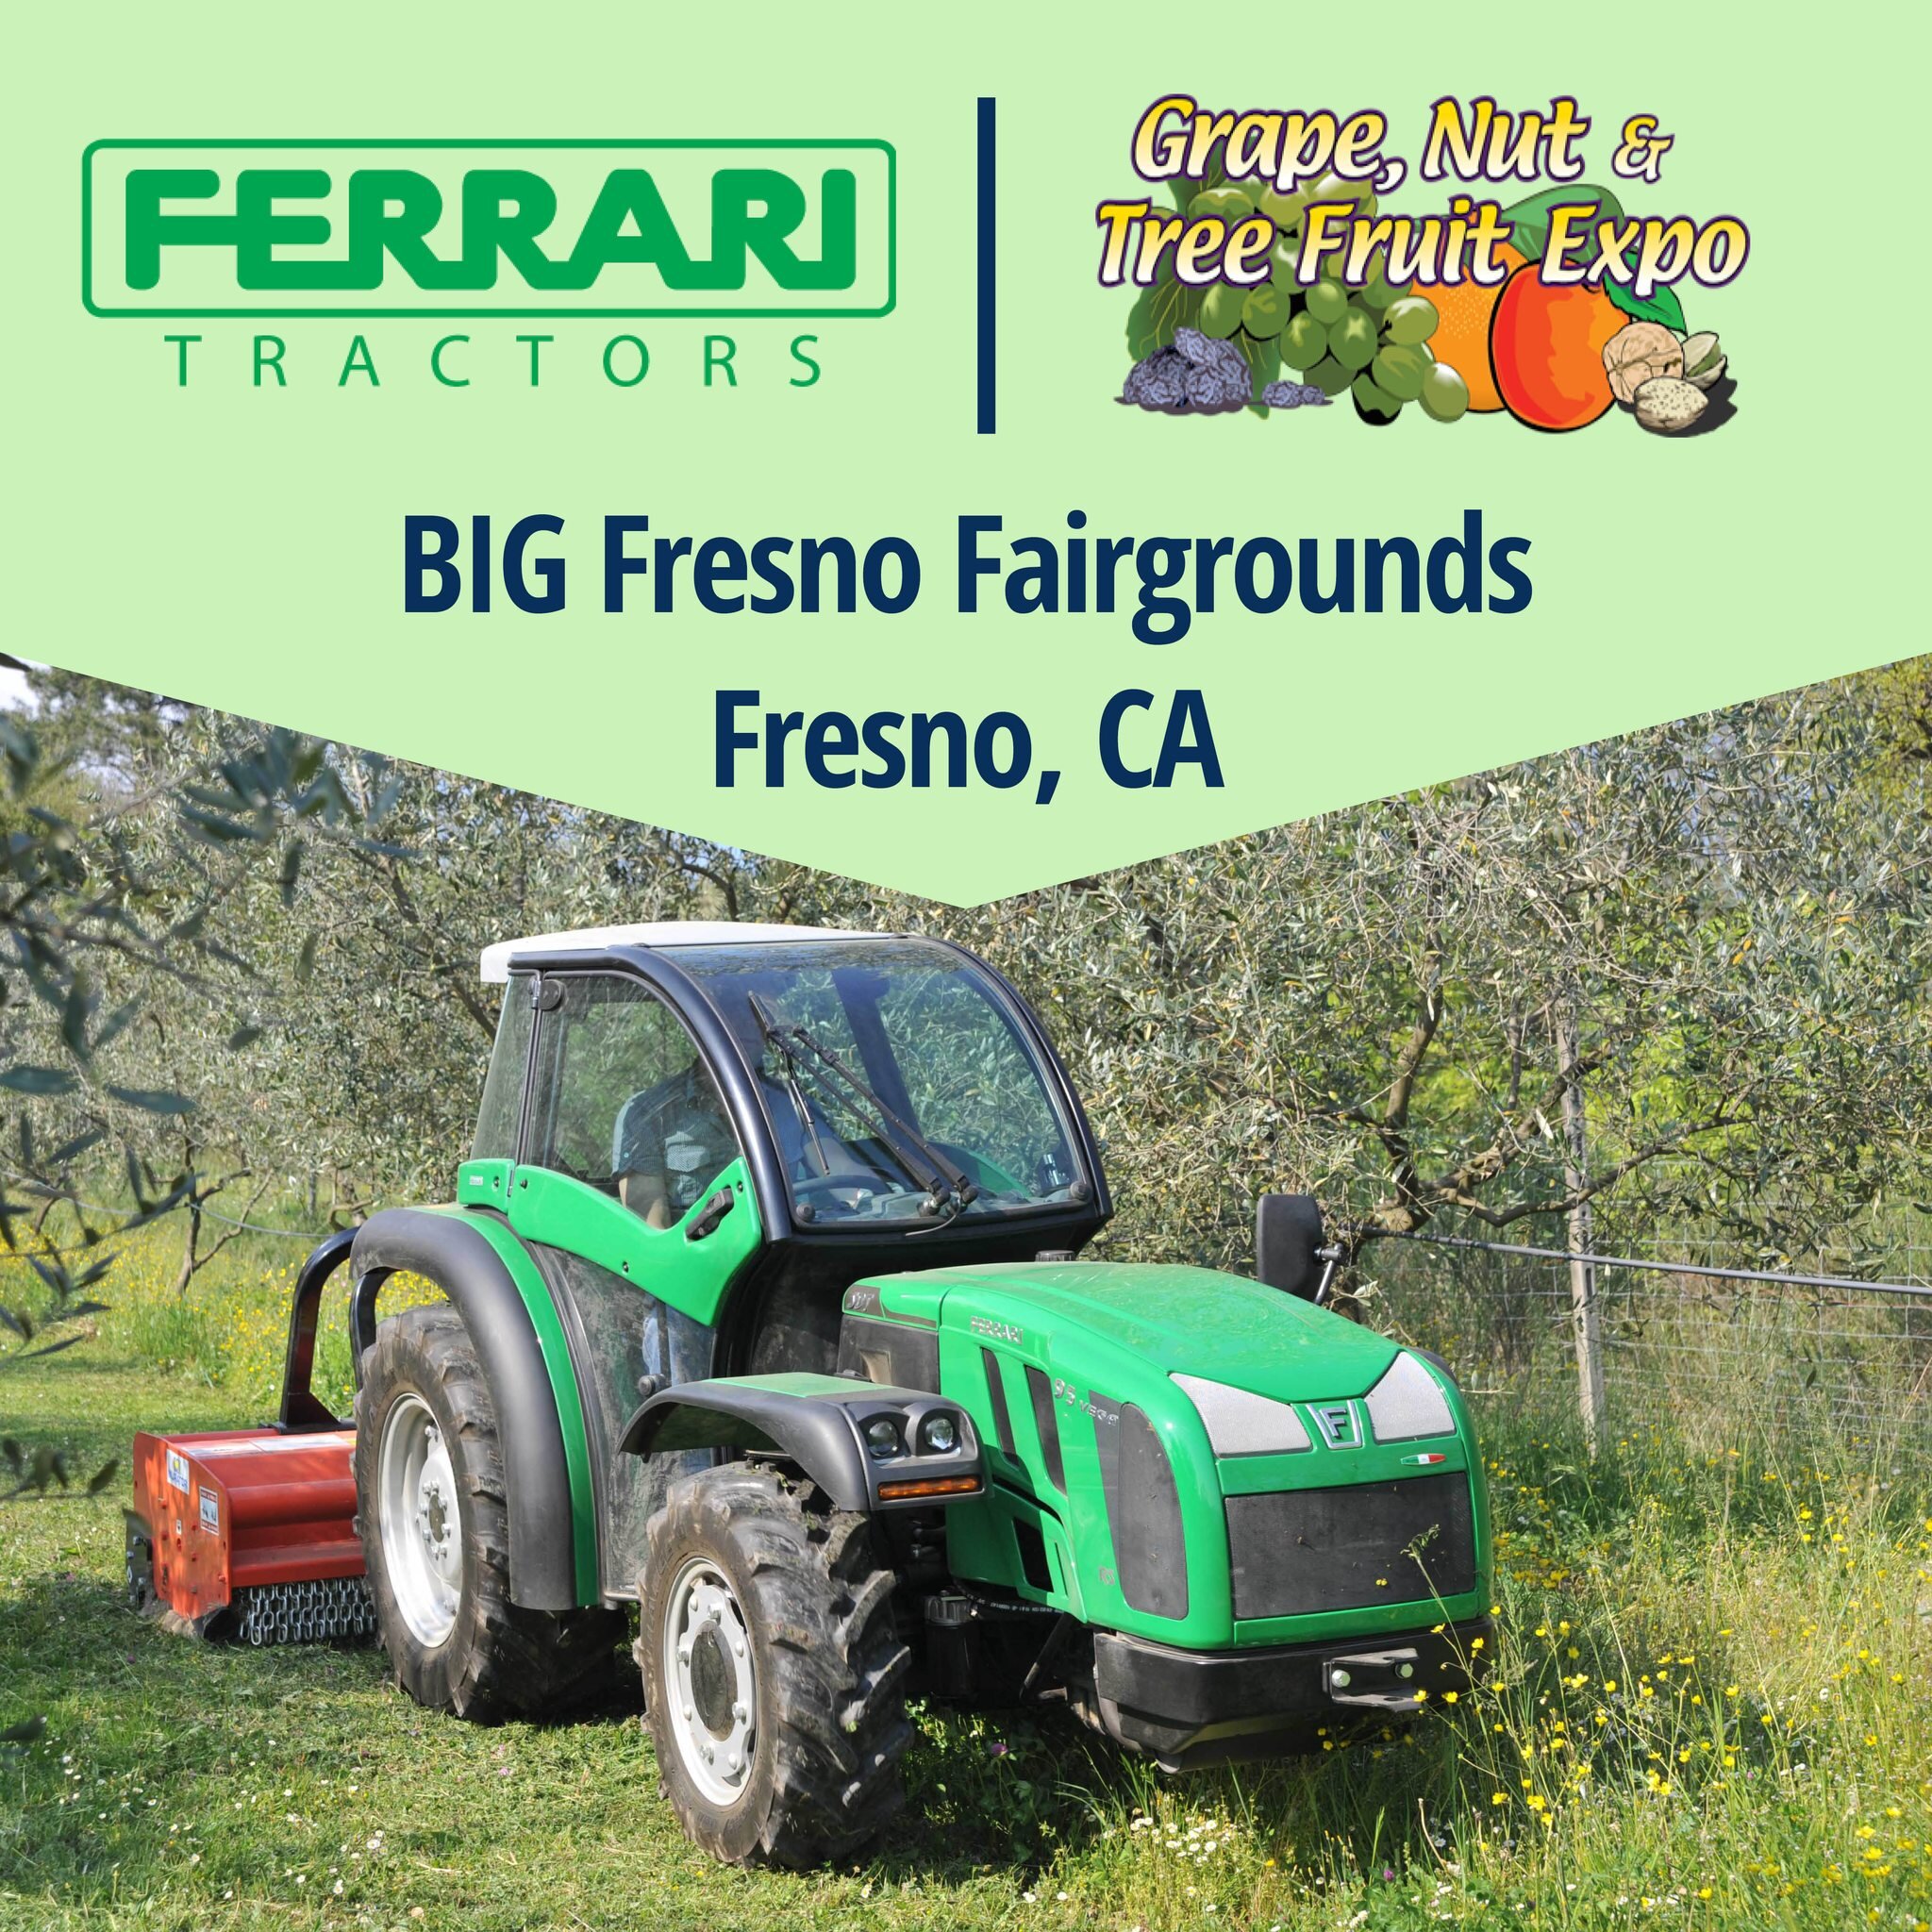 This Friday, Ferrari will be on display at the 2023 Grape, Nut &amp; Tree Fruit Expo at the BIG Fresno Fairgrounds! Register to attend for FREE today!
.
Fresno is the number one ag county in the state and this annual event is held in the center of th